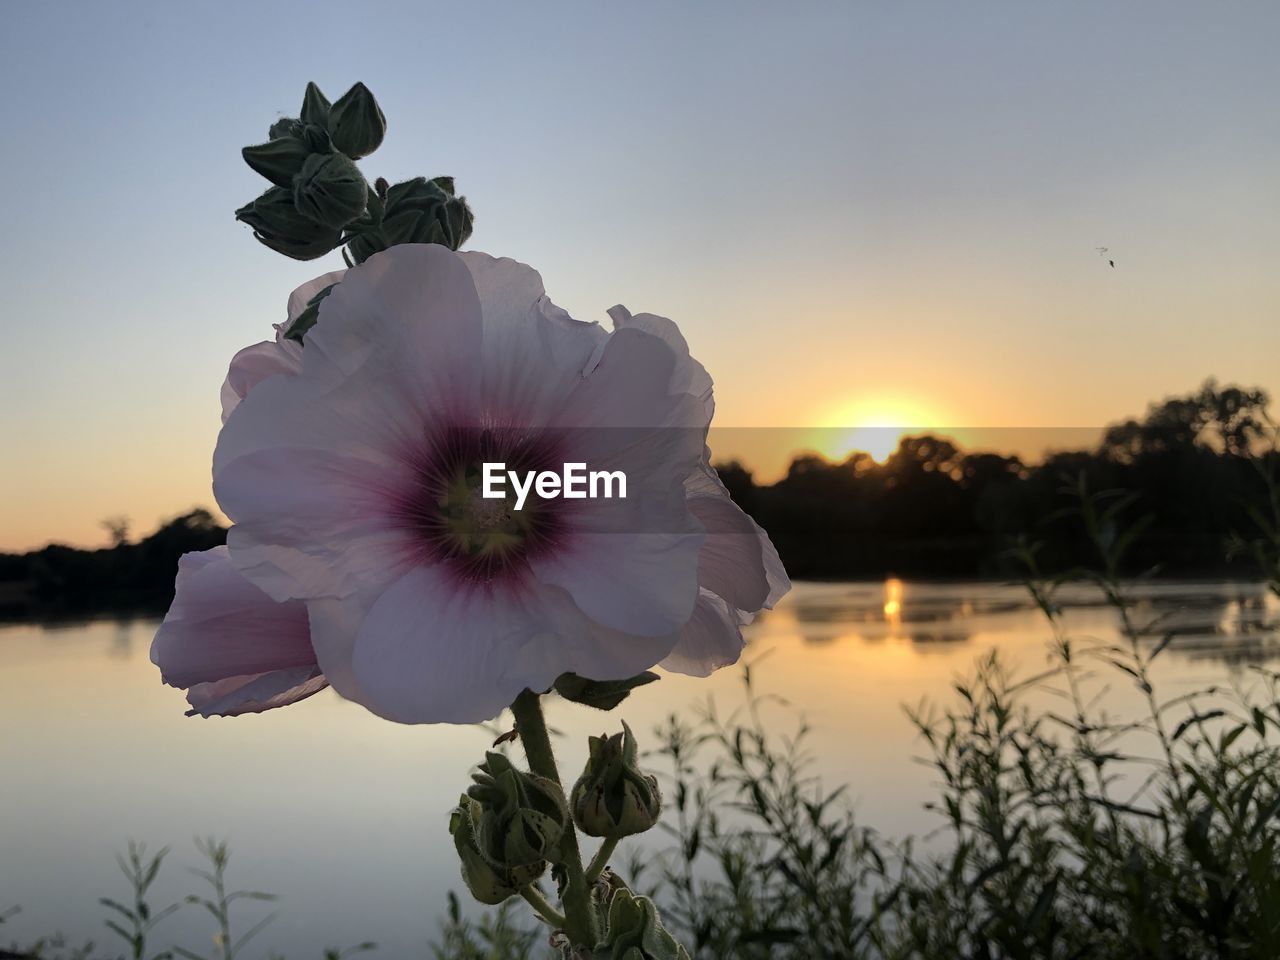 CLOSE-UP OF FLOWER AGAINST LAKE AT SUNSET